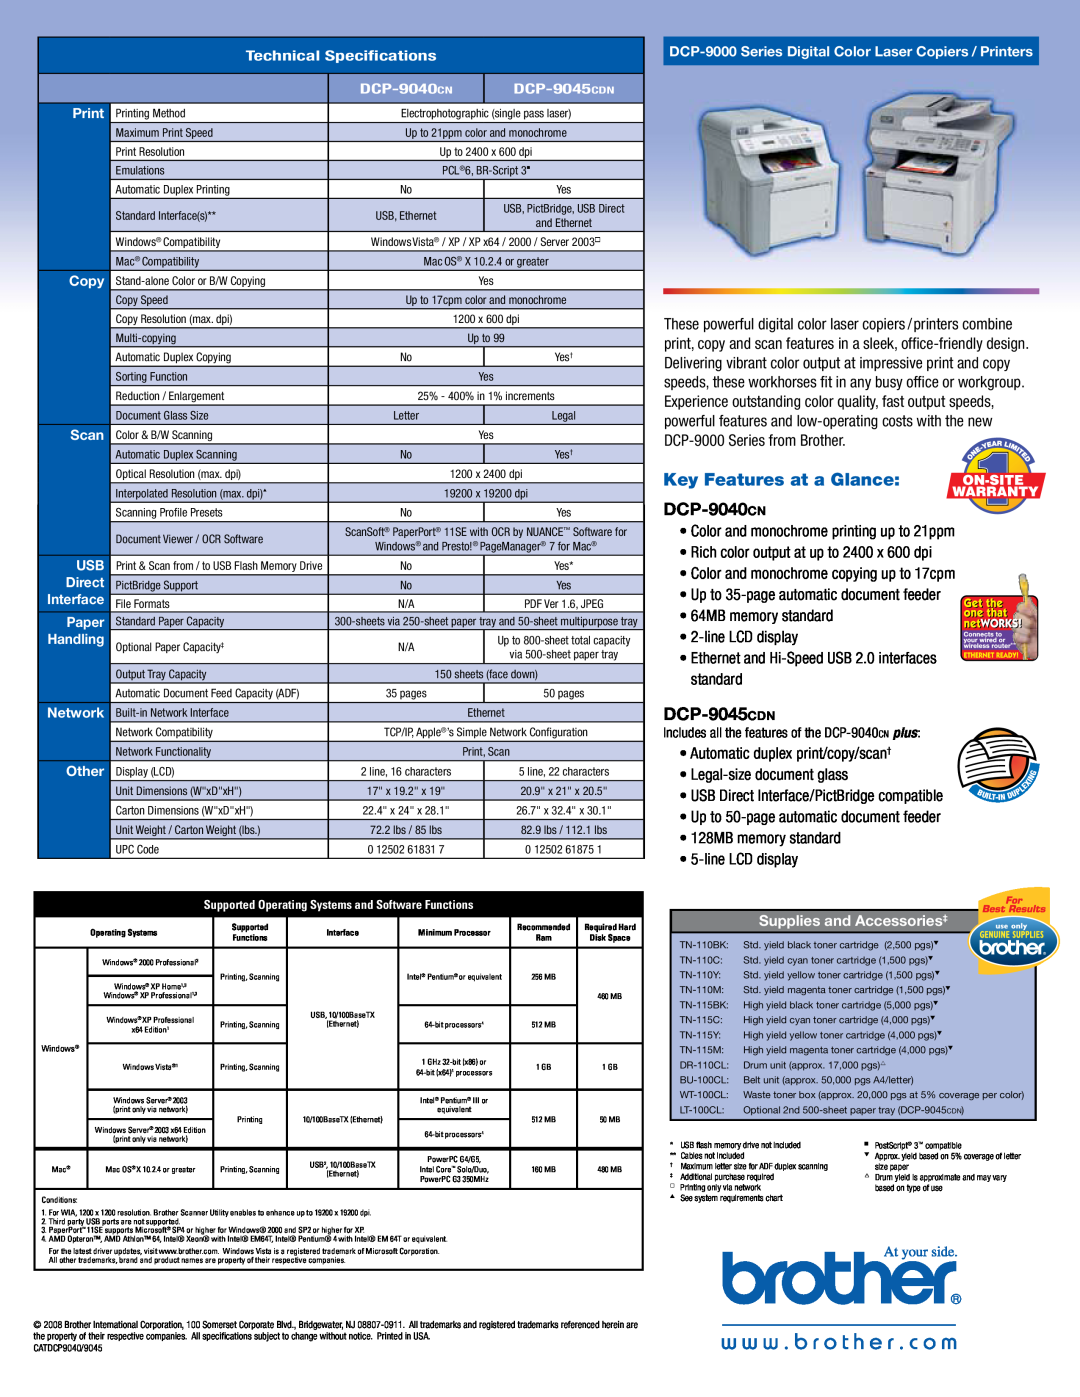 Brother DCP9040CN manual Key Features at a Glance, DCP-9040cn, DCP-9045cdn 